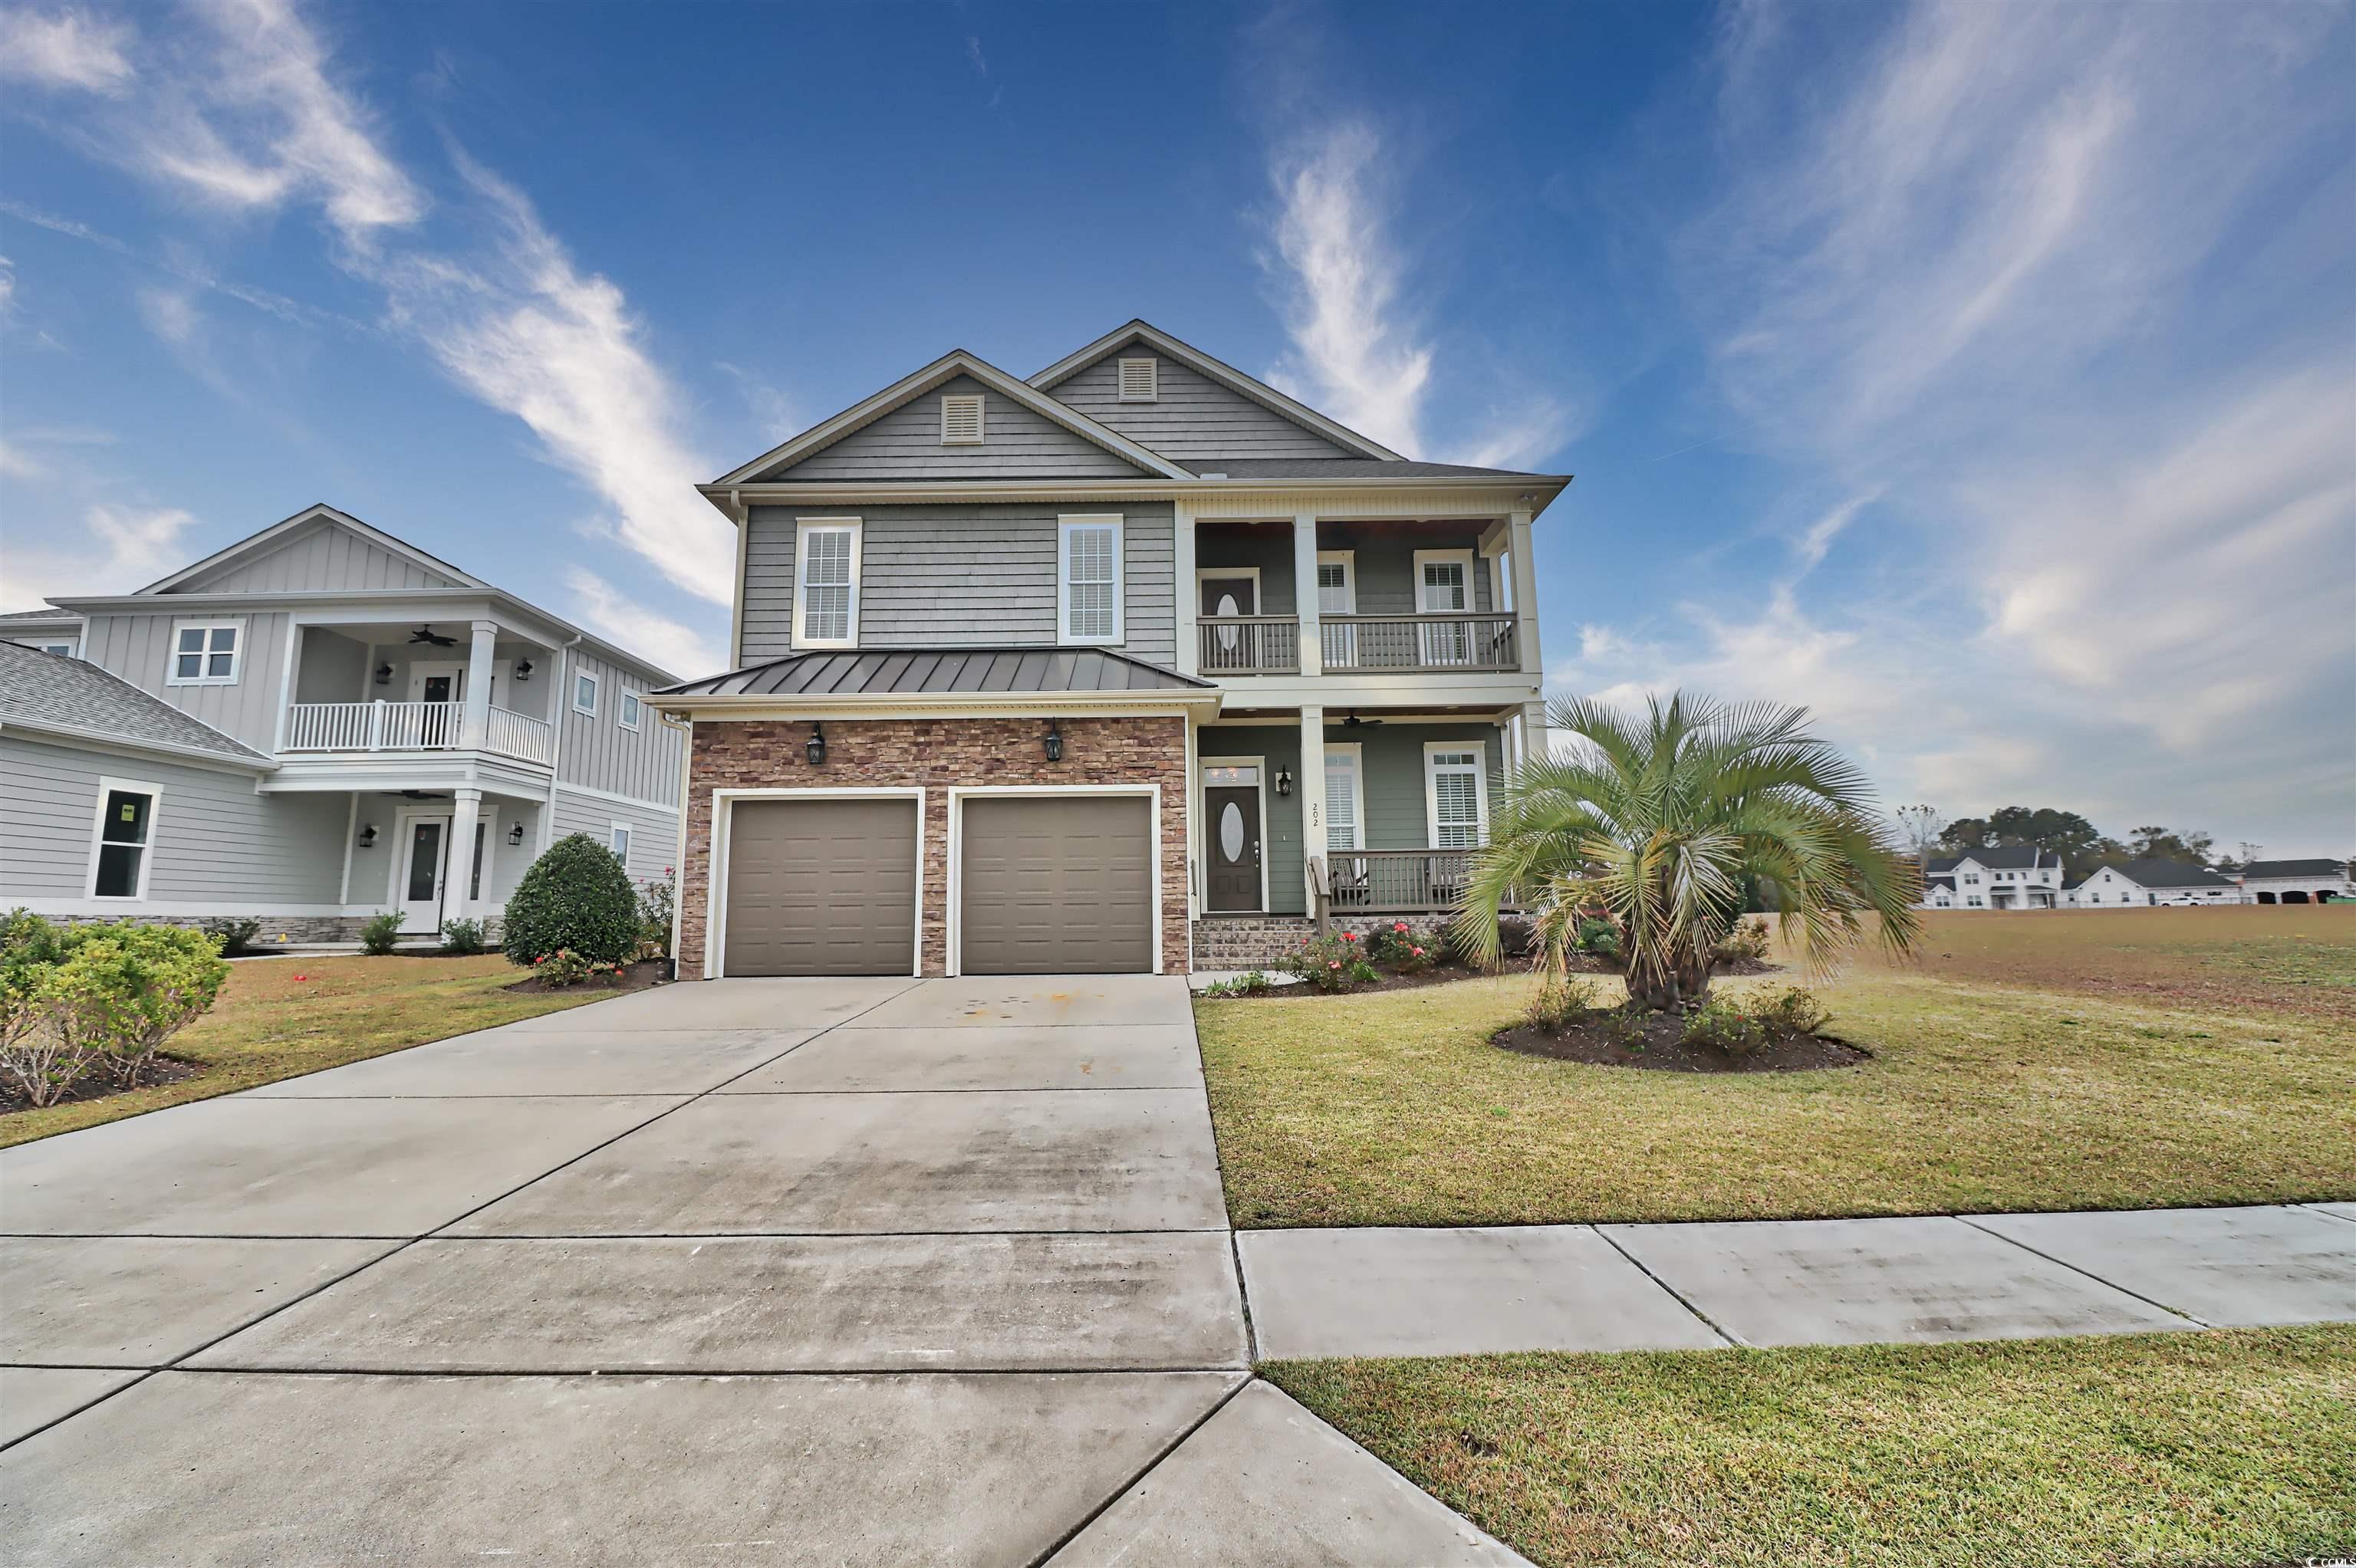 this custom built home is in a very desirable, sought after neighborhood. mainly because it is strategically located close to the ocean, it is bound by the intracoastal waterway on the north and two nicely manicured ponds on the south. the attraction is, it is only a golf cart ride to the ocean, restaurants, and shopping malls in the area. this dwelling is constructed on a raised slab. it has a unique setting on it's lot. you have almost a 360 degree view of the water, intracoastal waterway and the ponds from inside the dwelling. the exterior is hardy plank and shake shingles. the exterior framing on the two levels is 2x6’s with r-19 insulation. the first level is 10ft. ceilings with 8ftsolid wood doors. the floor 18 inch tile in the laundry room and half bath. the balance of the first floor is natural hickory engineer  hard wired security system with cameras first level is an open floor plan. the kitchen, dining room and family room are open. the kitchen cabinets are soft close. the stove is vented to the exterior. take close look at all the molding and wainscoting on the first level. the coffer ceilings in the family room is neatly designed. the closet in the master bed room on first floor is a large walk in closet with built in shelves. the interior walls on each level are insulated to provide quietness and have additional support between each stud for extra strength. the second level has 9f ceilings with extensive ceiling molding. three of the bed rooms on second level have enough space for king size beds and other furniture. three of the bed rooms have large walk in closets with shelves. the 5th bed room is used as an office and mini kitchen or a bedroom. it also has a washer and dryer hook up. the family room 2nd level is very cozy and has access to front porch for a view of the intracoastal waterway.  remember opportunities don't go away they just go to somebody else! do not forgrt to ask your realtor for a copy of the feature list.